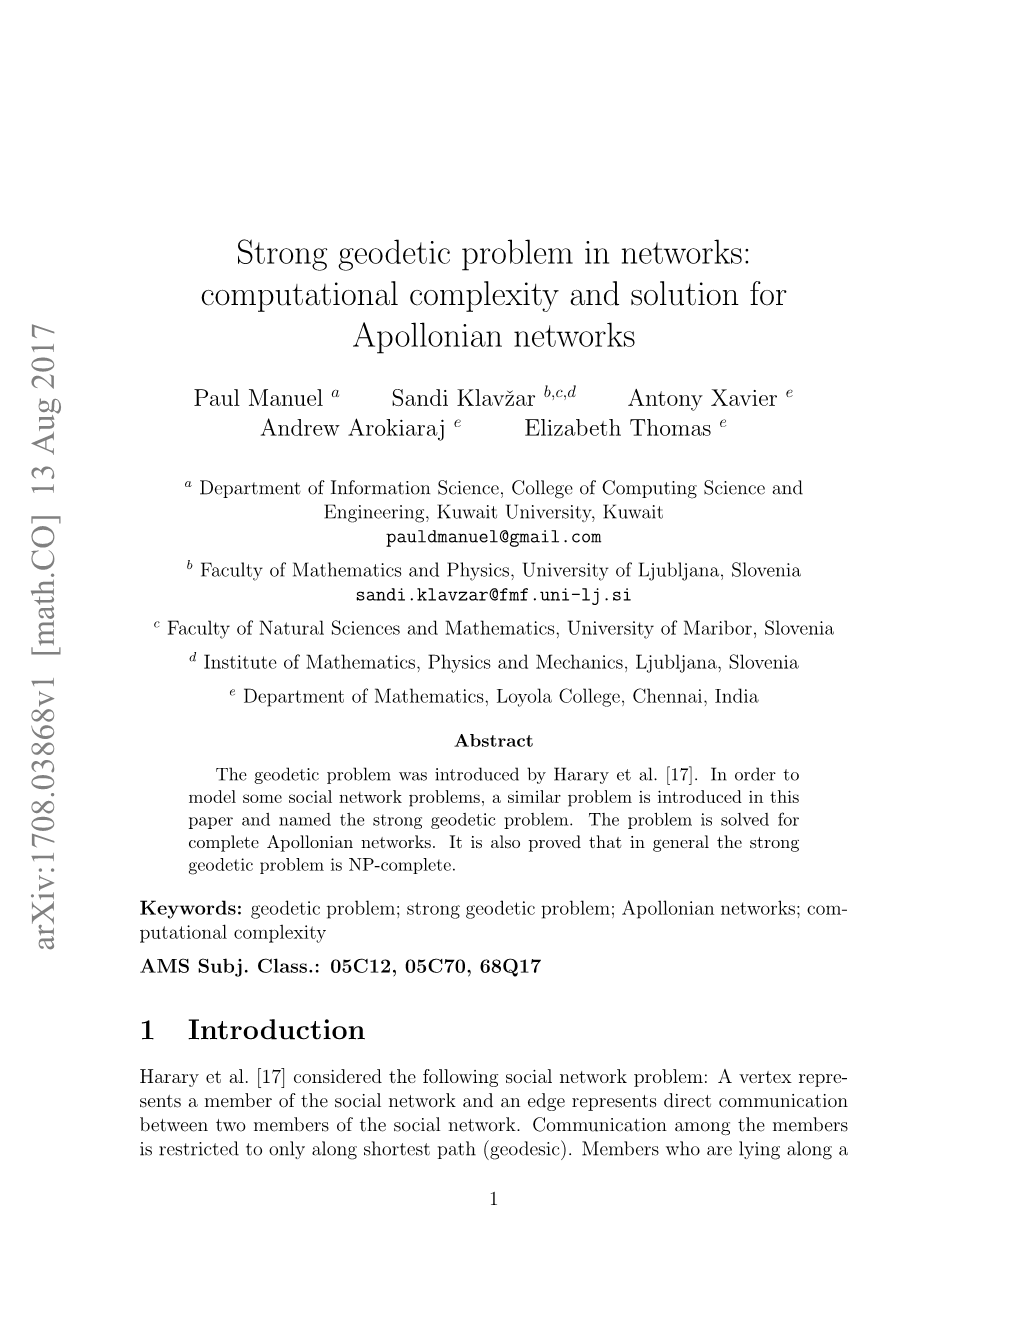 Strong Geodetic Problem in Networks: Computational Complexity and Solution for Apollonian Networks Arxiv:1708.03868V1 [Math.CO]